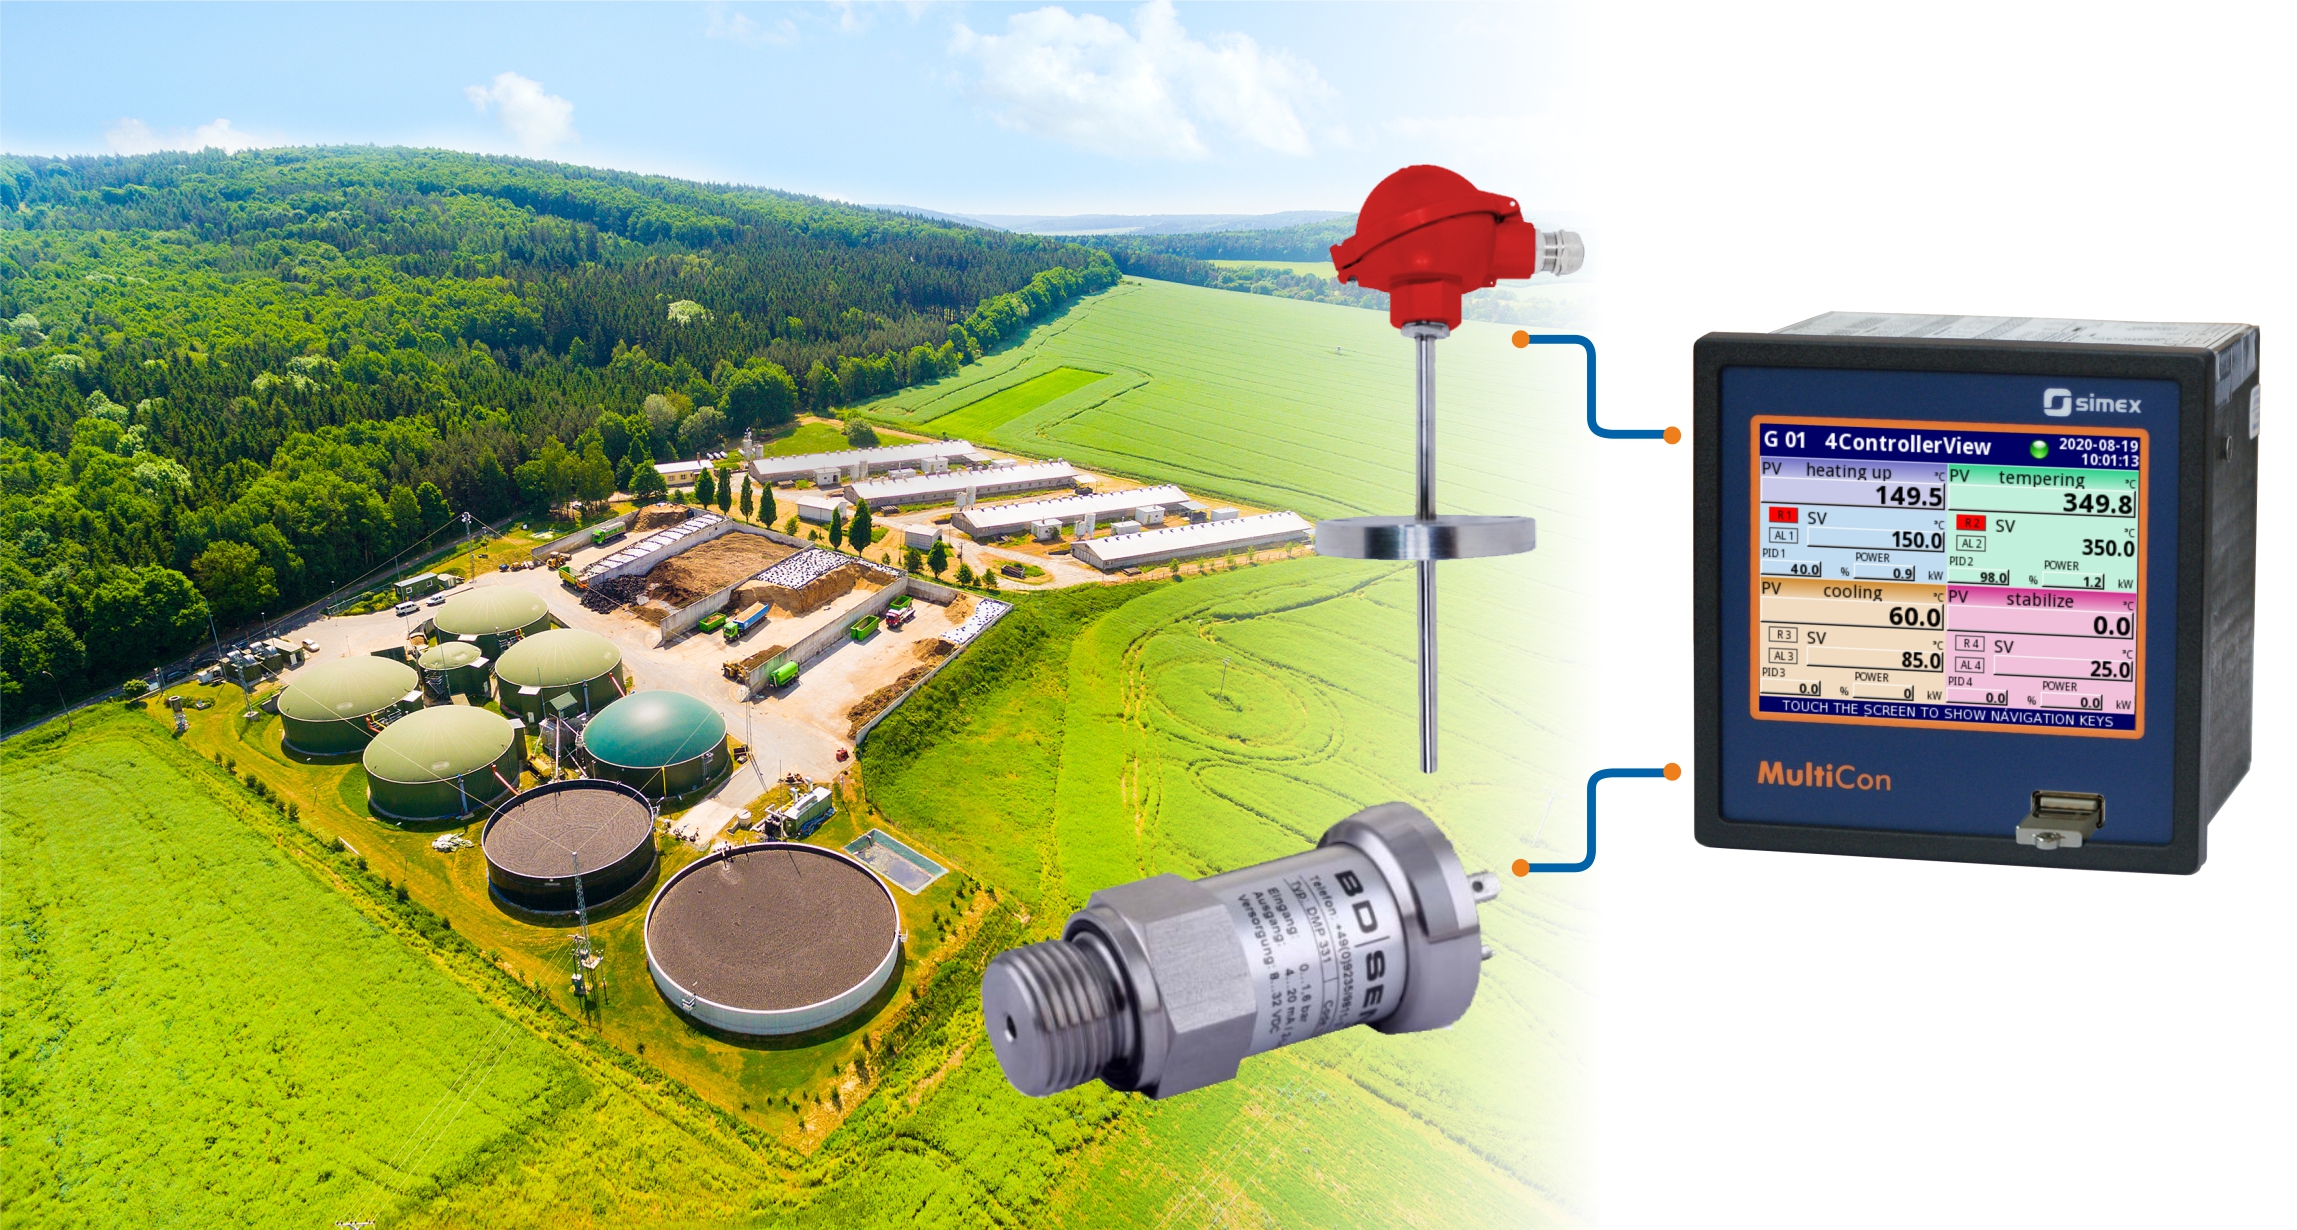 MultiCon CMC-141 as a recorder of measurements from temperature and pressure sensors in biogas plants